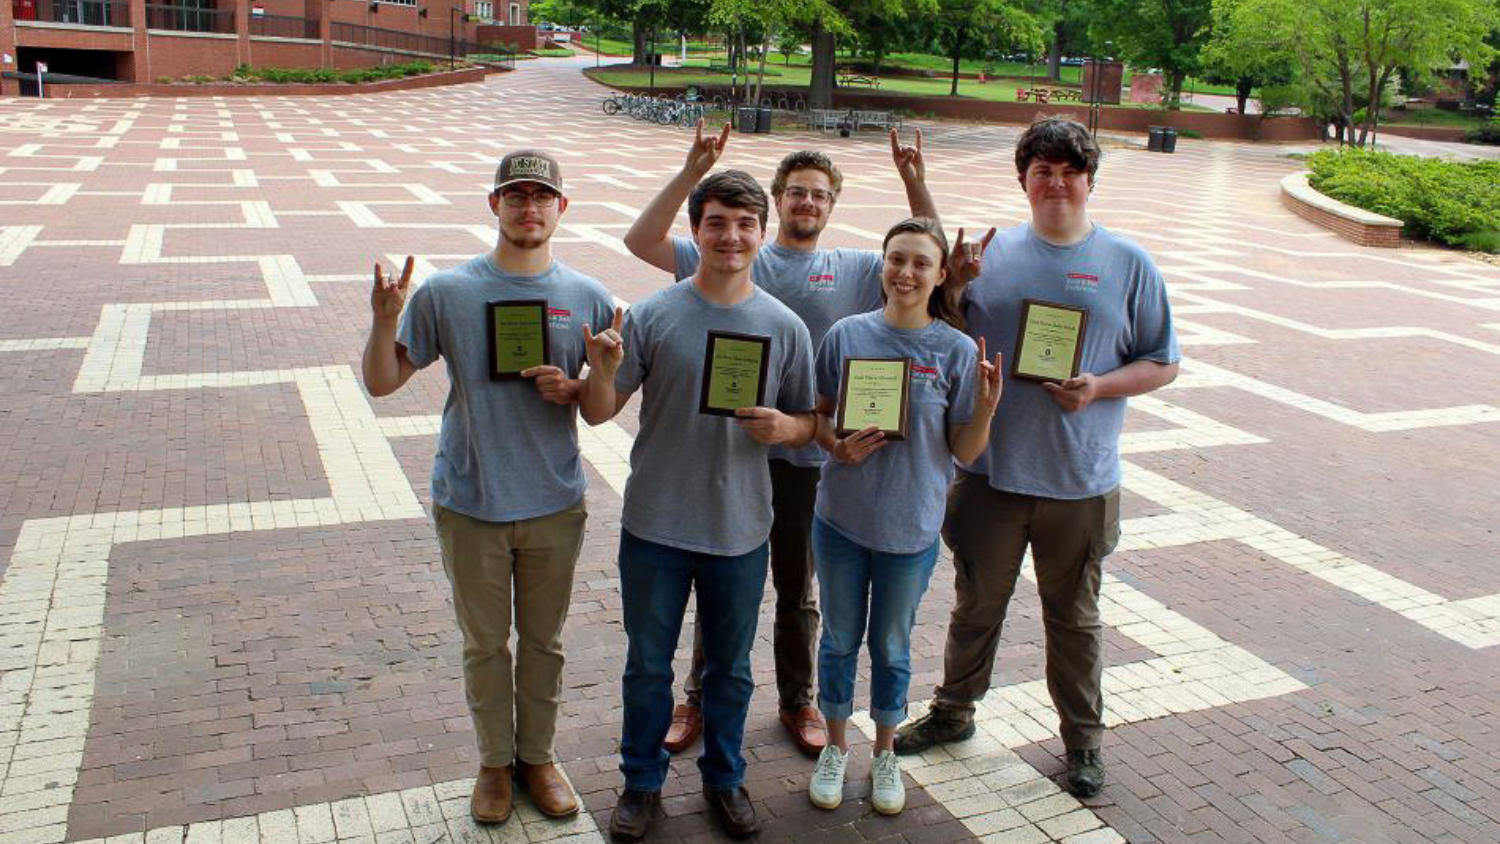 NC State students with winning plaques